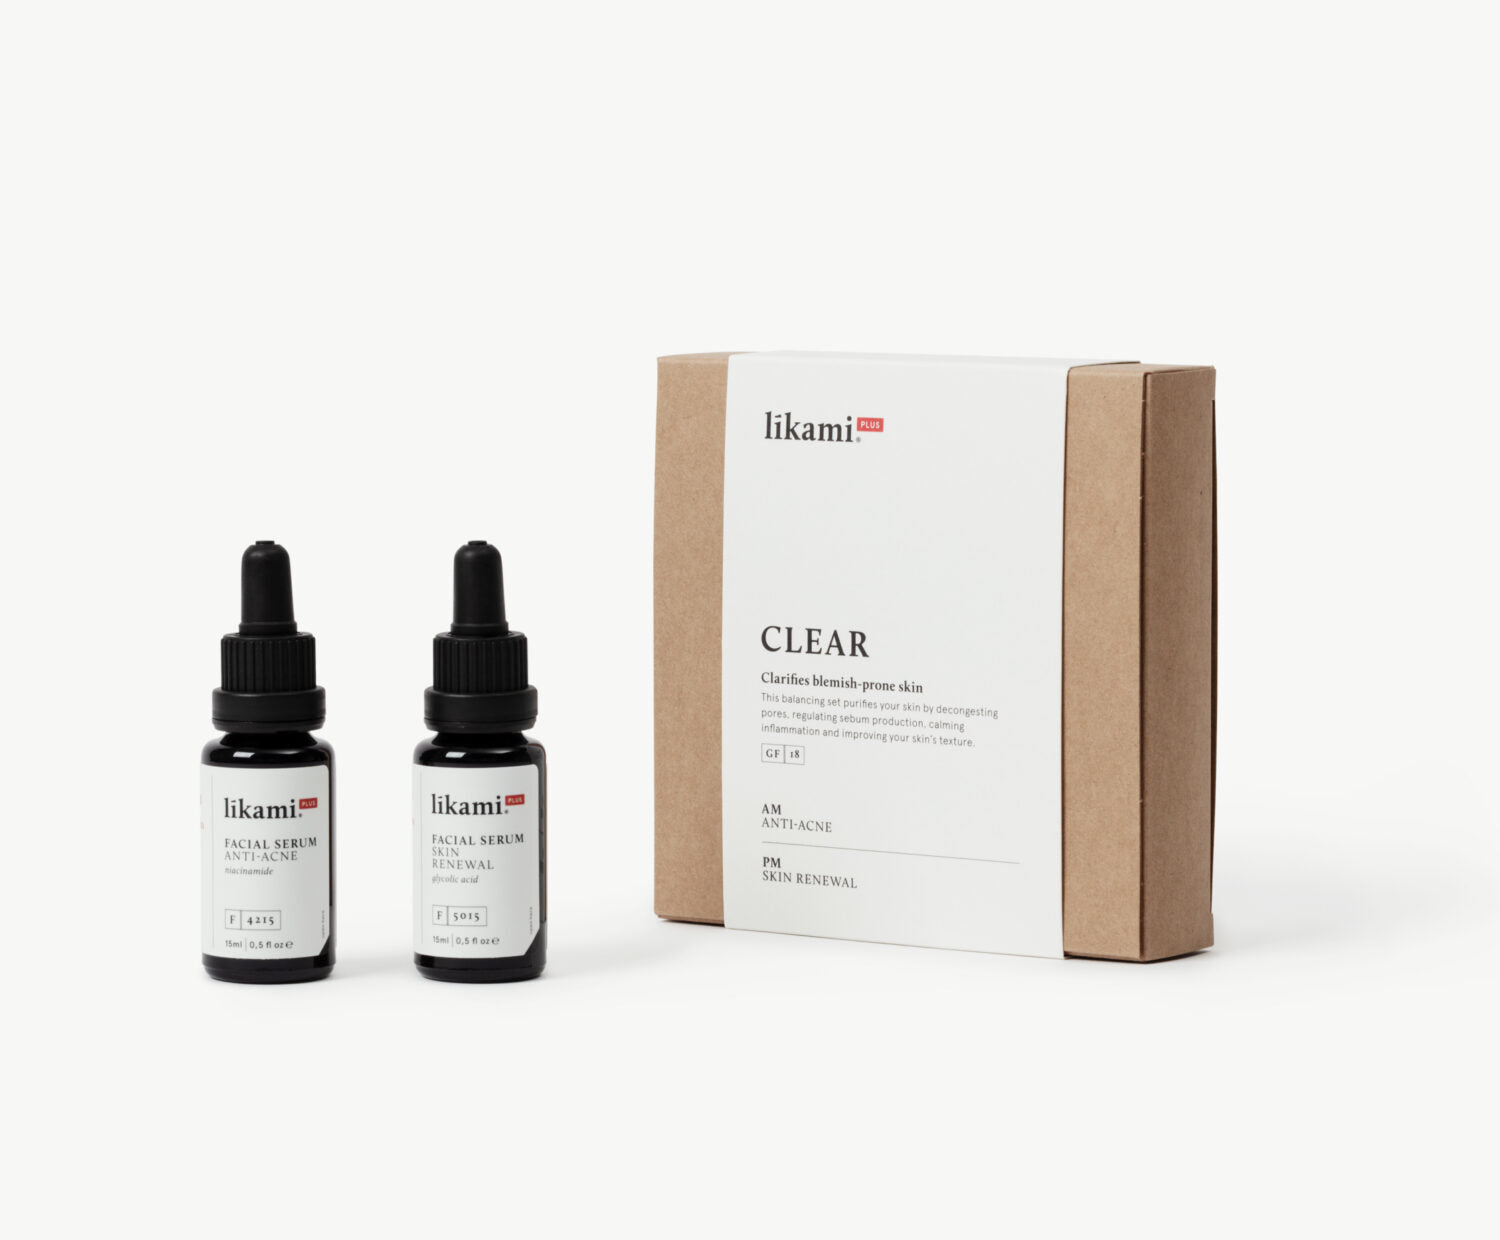 Likami plus - CLEAR serum set // focus on purifying & calming inflammation - acne prone